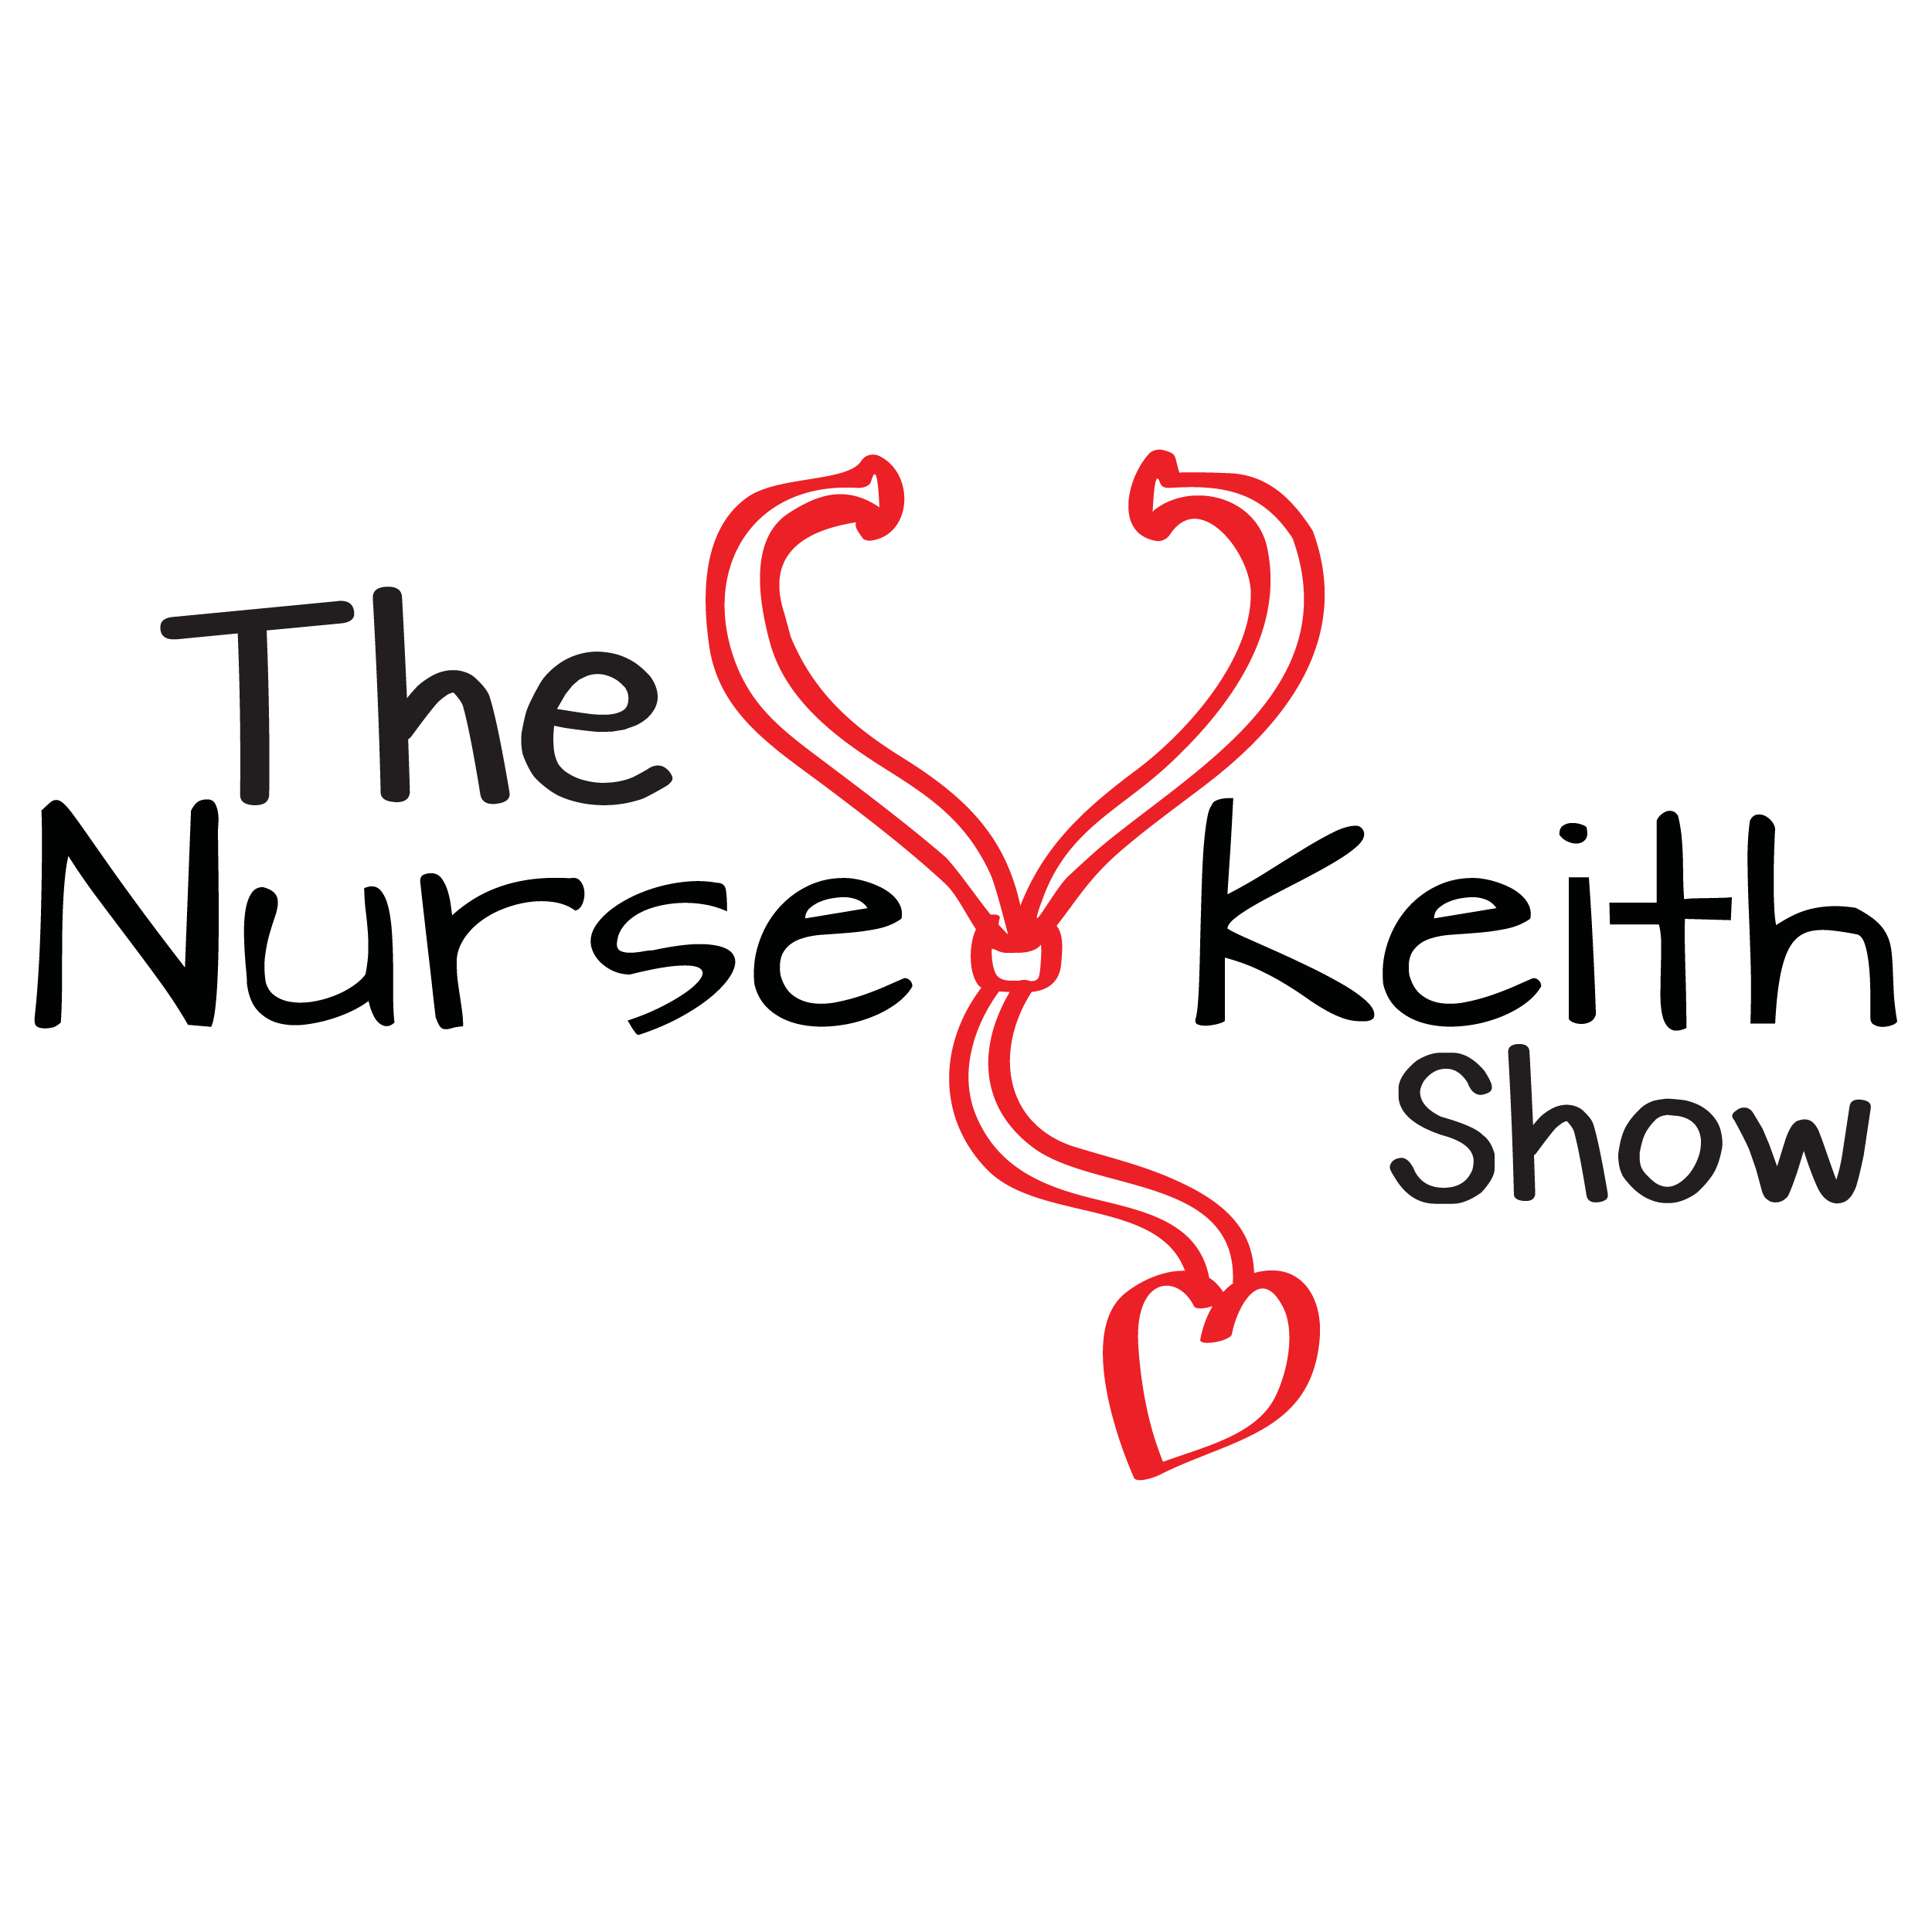 Confidently Reducing Overwhelm and Fulfilling Your Dreams | The Nurse Keith Show, EPS 346